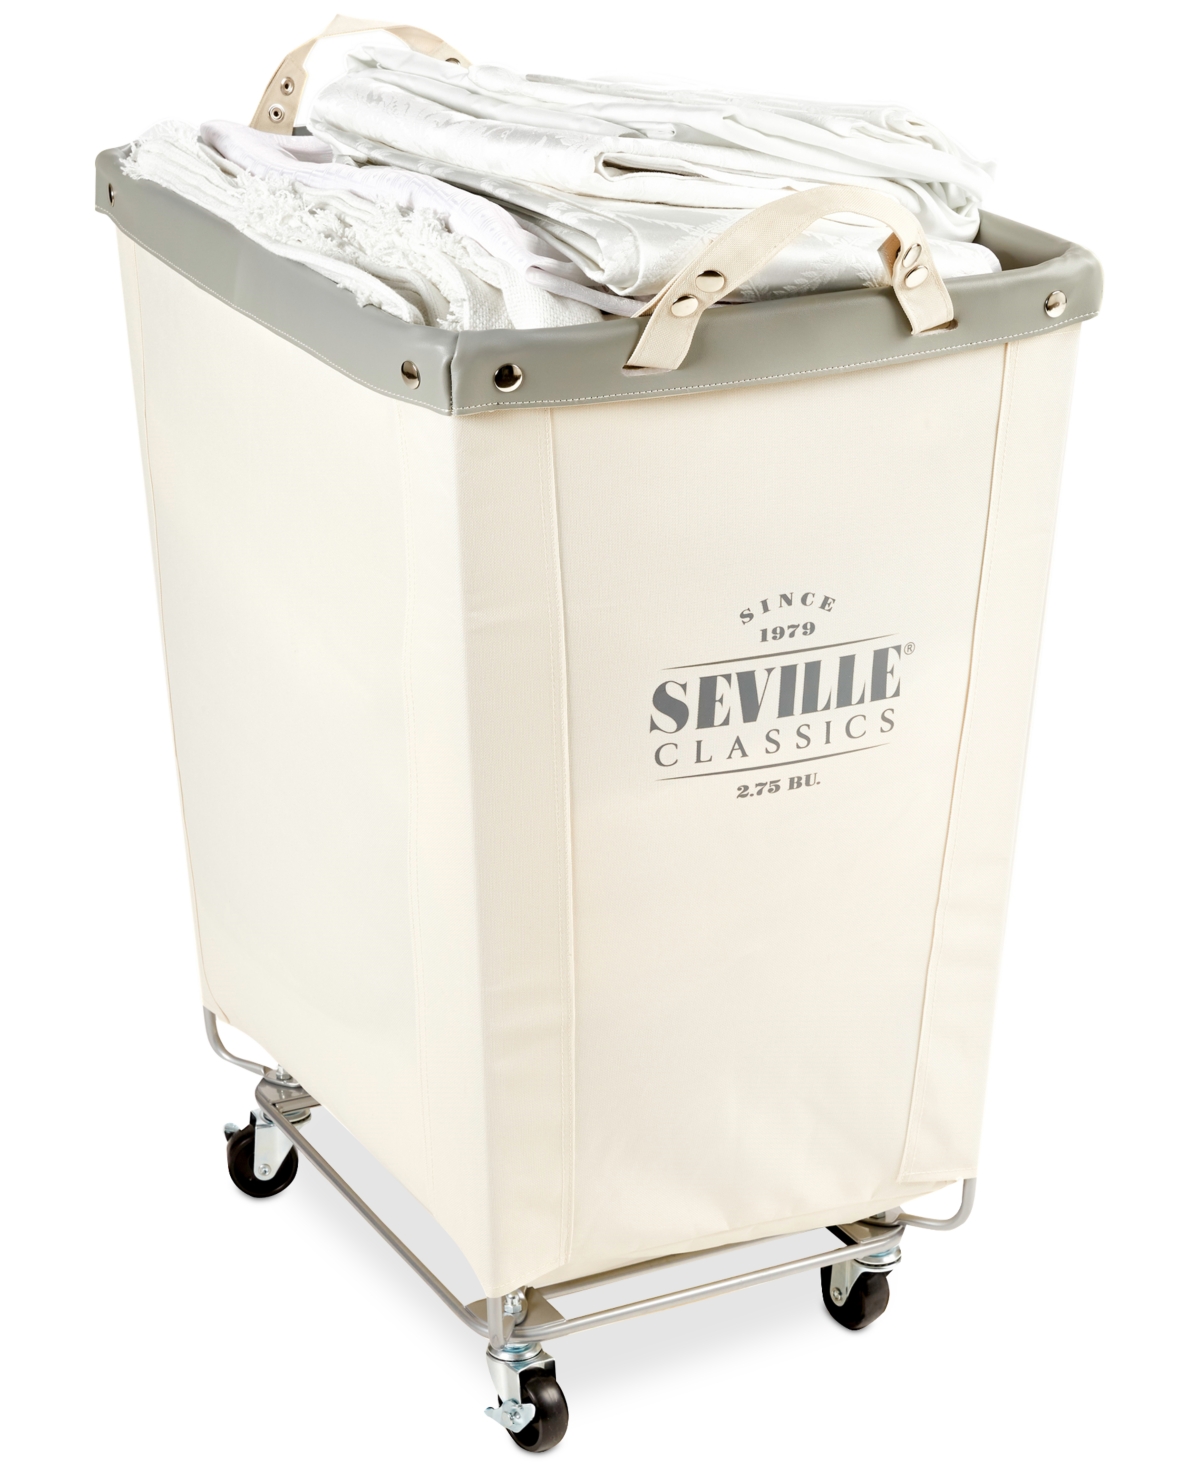 Seville Classics Commercial Grade Heavy-duty Extra-large Canvas Wheeled Laundry Hamper In Natural White